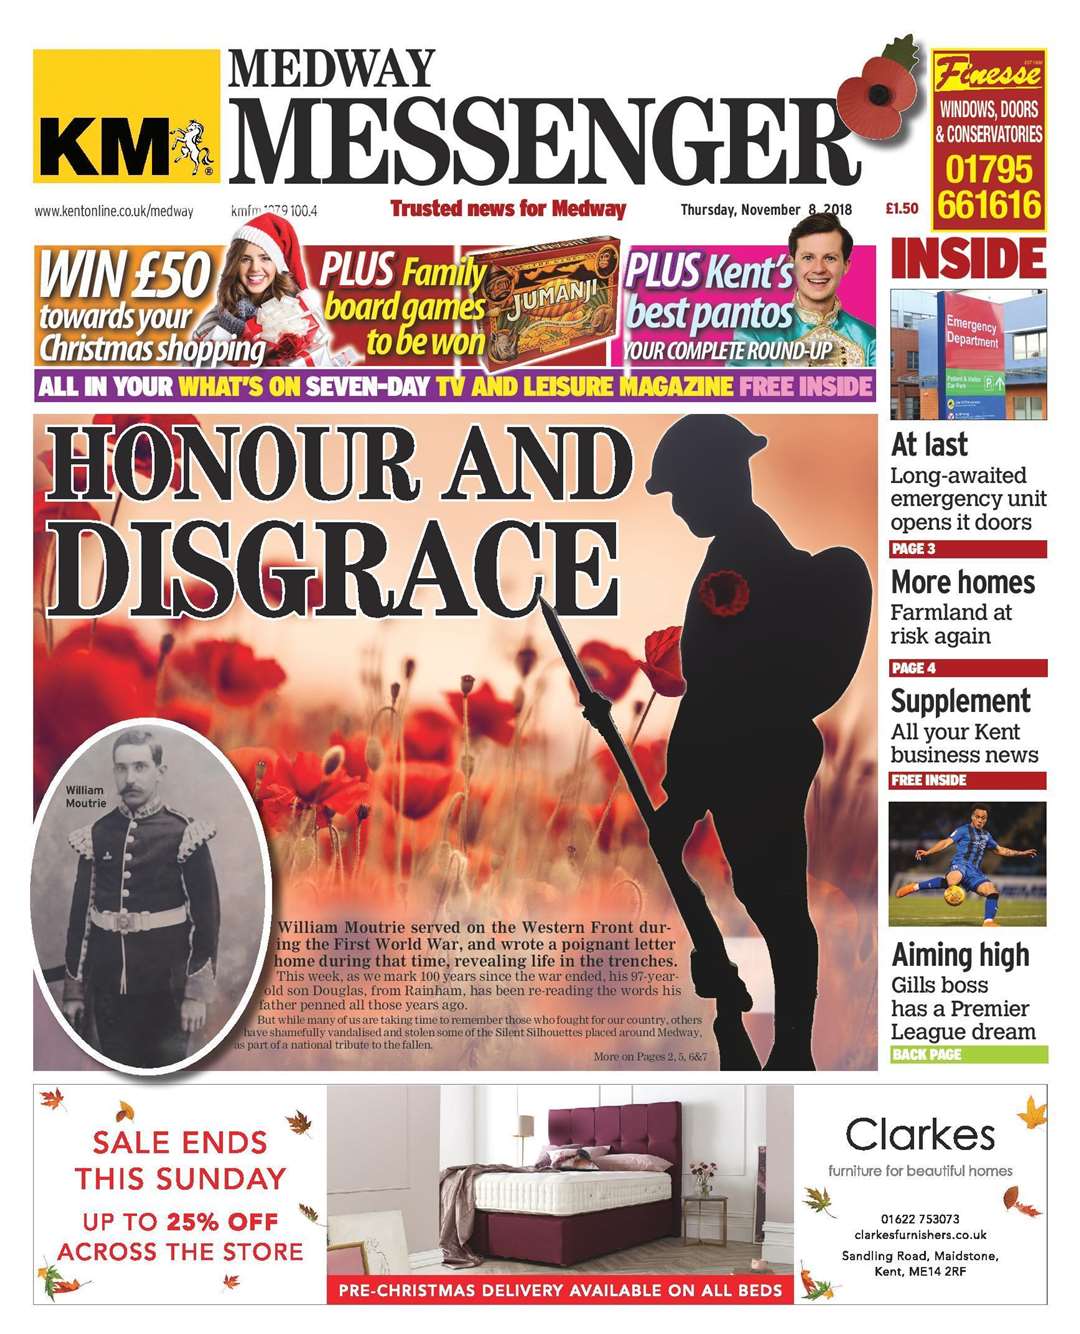 The Honour and Disgrace front page